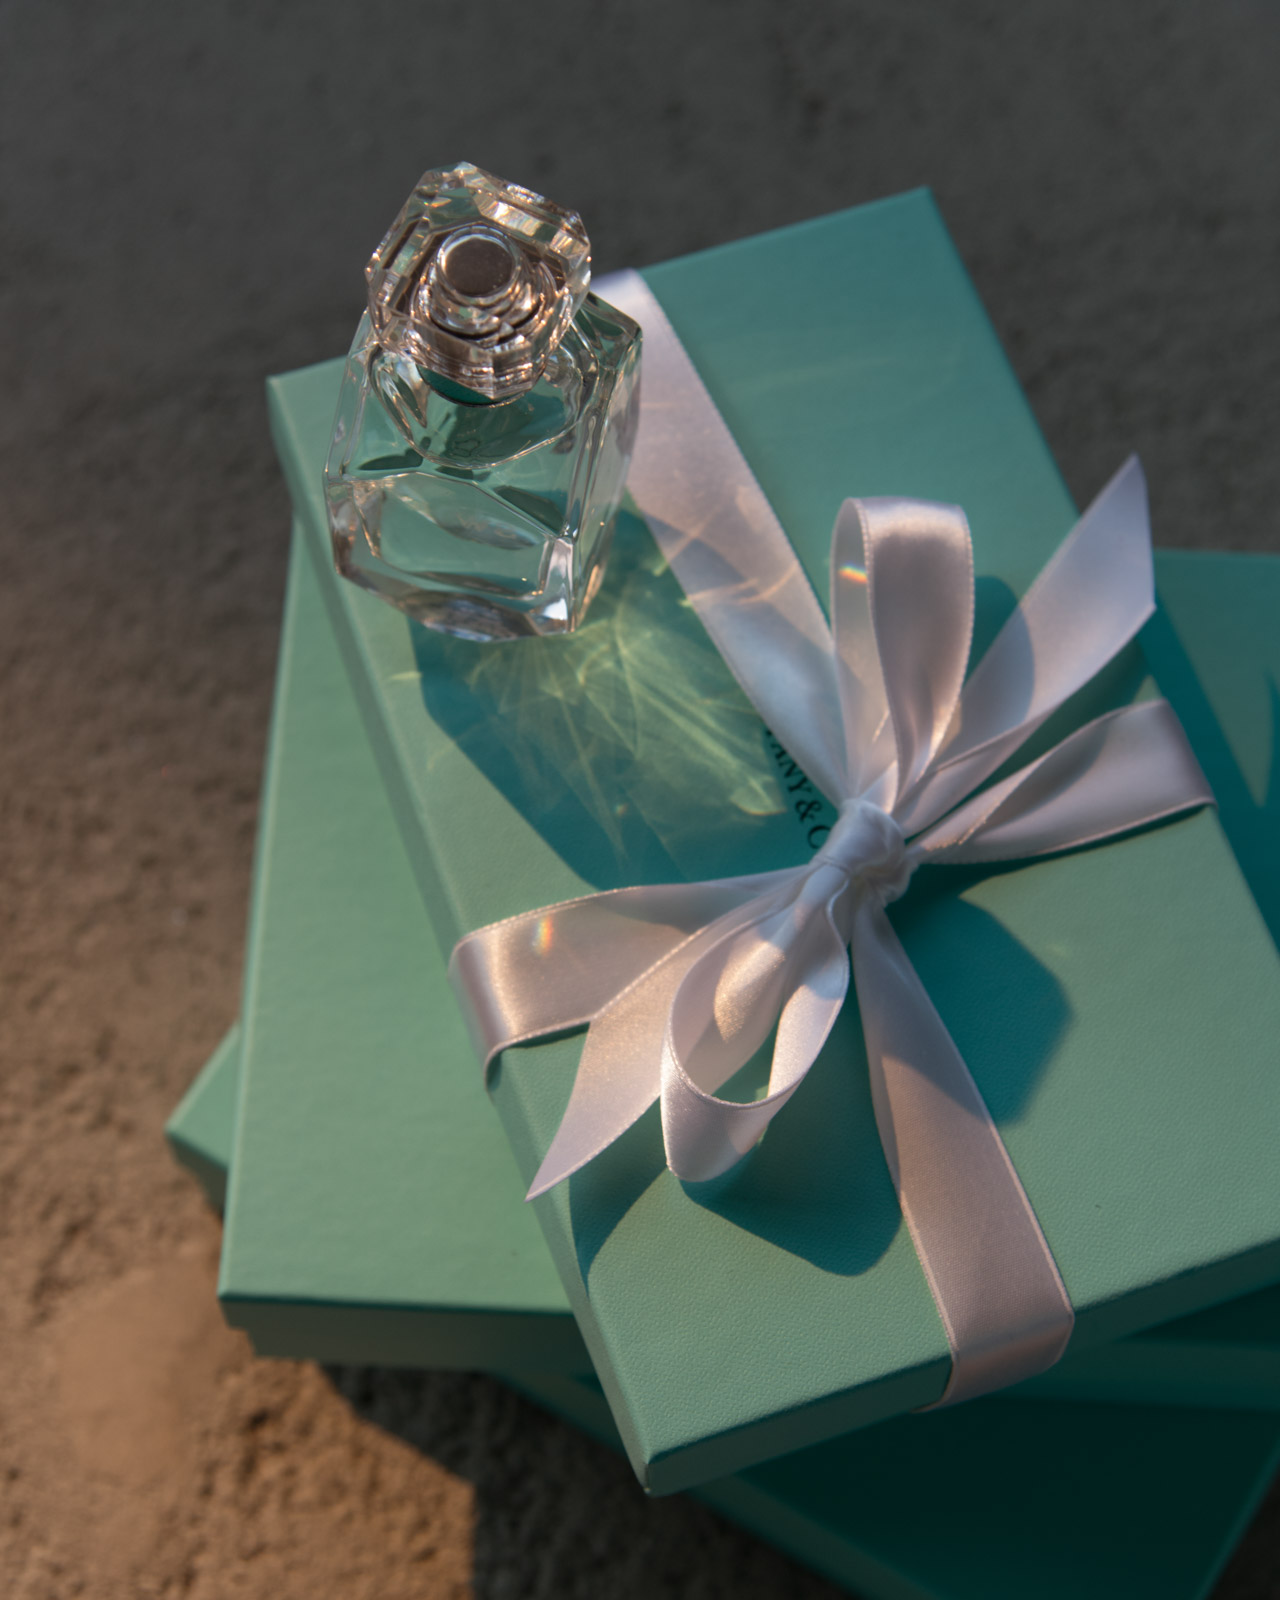 love [lʌv] noun 1. a profoundly tender, passionate affection for another person 2. a feeling of a warm personal attachment or deep affection.tiffany and co. blue boxes with perfume valentinesday gift guide stormwes